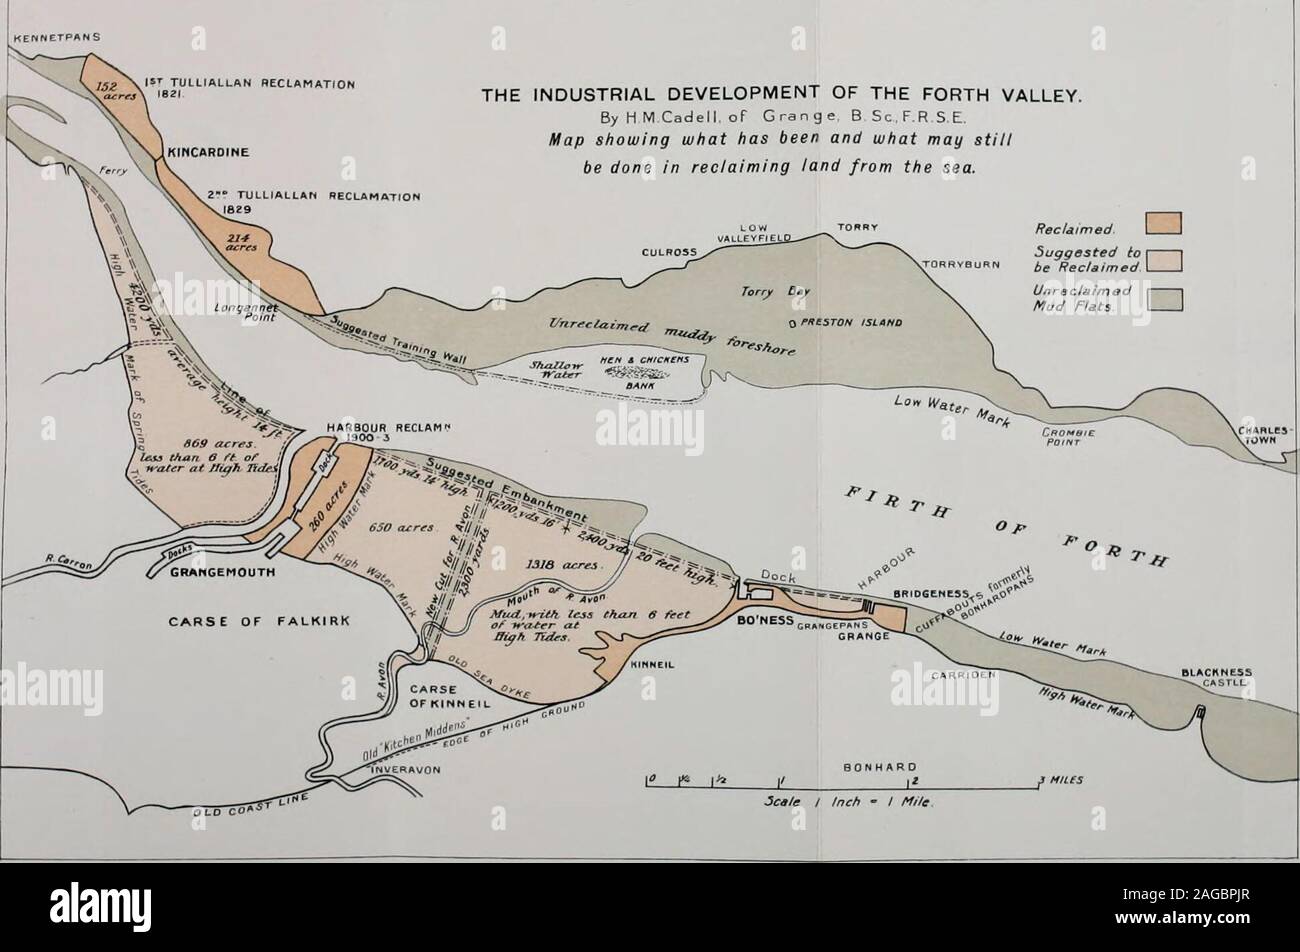 Scottish geographical magazine. BON H ARD Lf Inch » / Mi/e THE INDUSTRIAL  DEVELOPMENT OF THE FORTH VALLEY. By HM Cadell. of Grange. B5c,F.RSE, Map  showing what has been and what